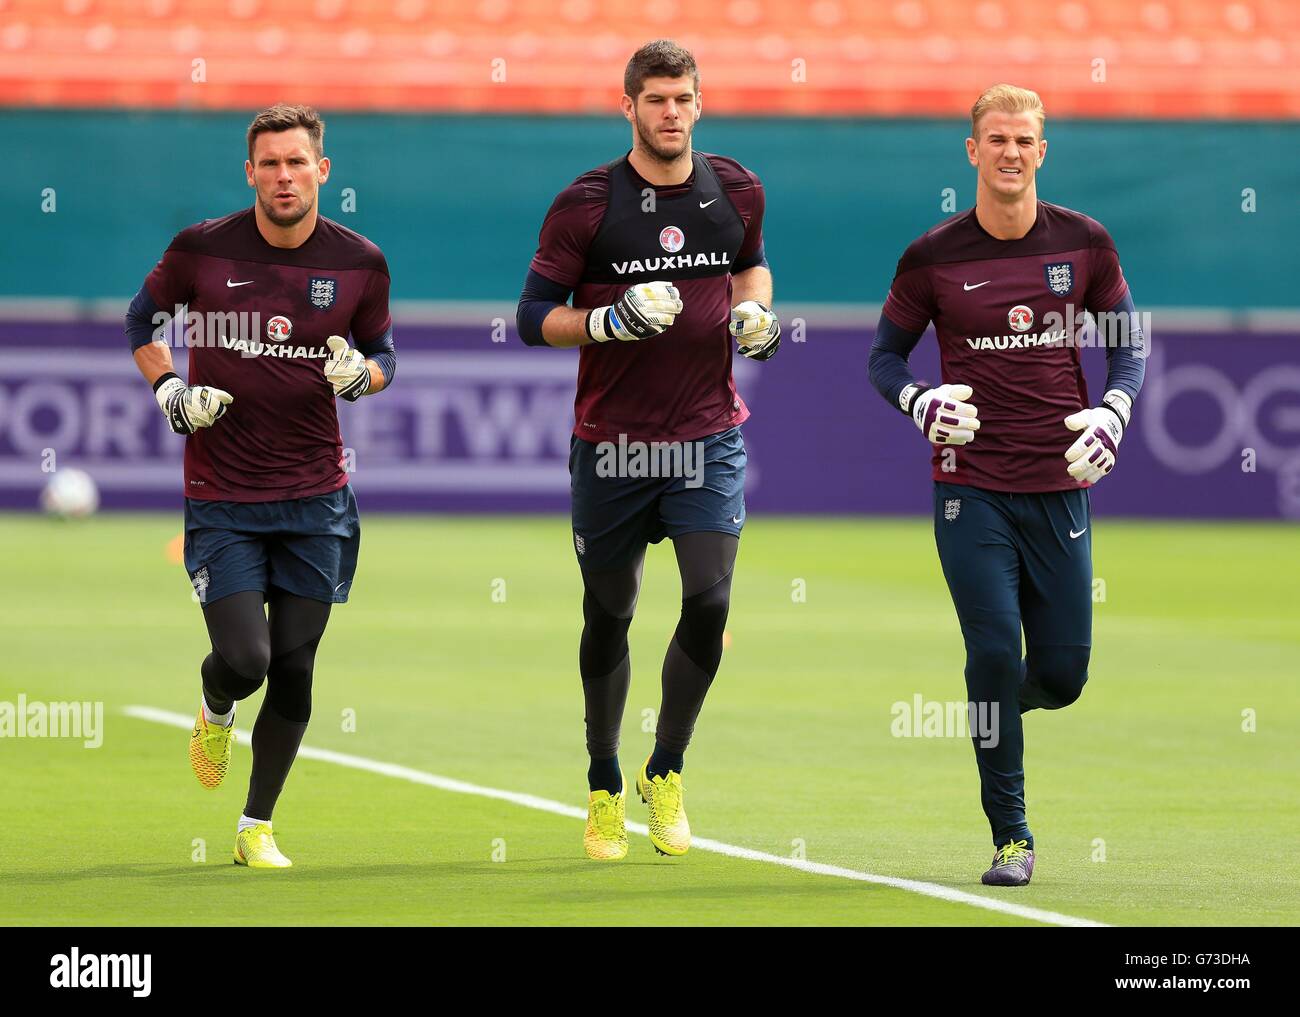 England goalkeepers (left to right) Ben Foster, Fraser Forster and Joe Hart during a training session at the Sun Life Stadium in Miami, USA. Stock Photo